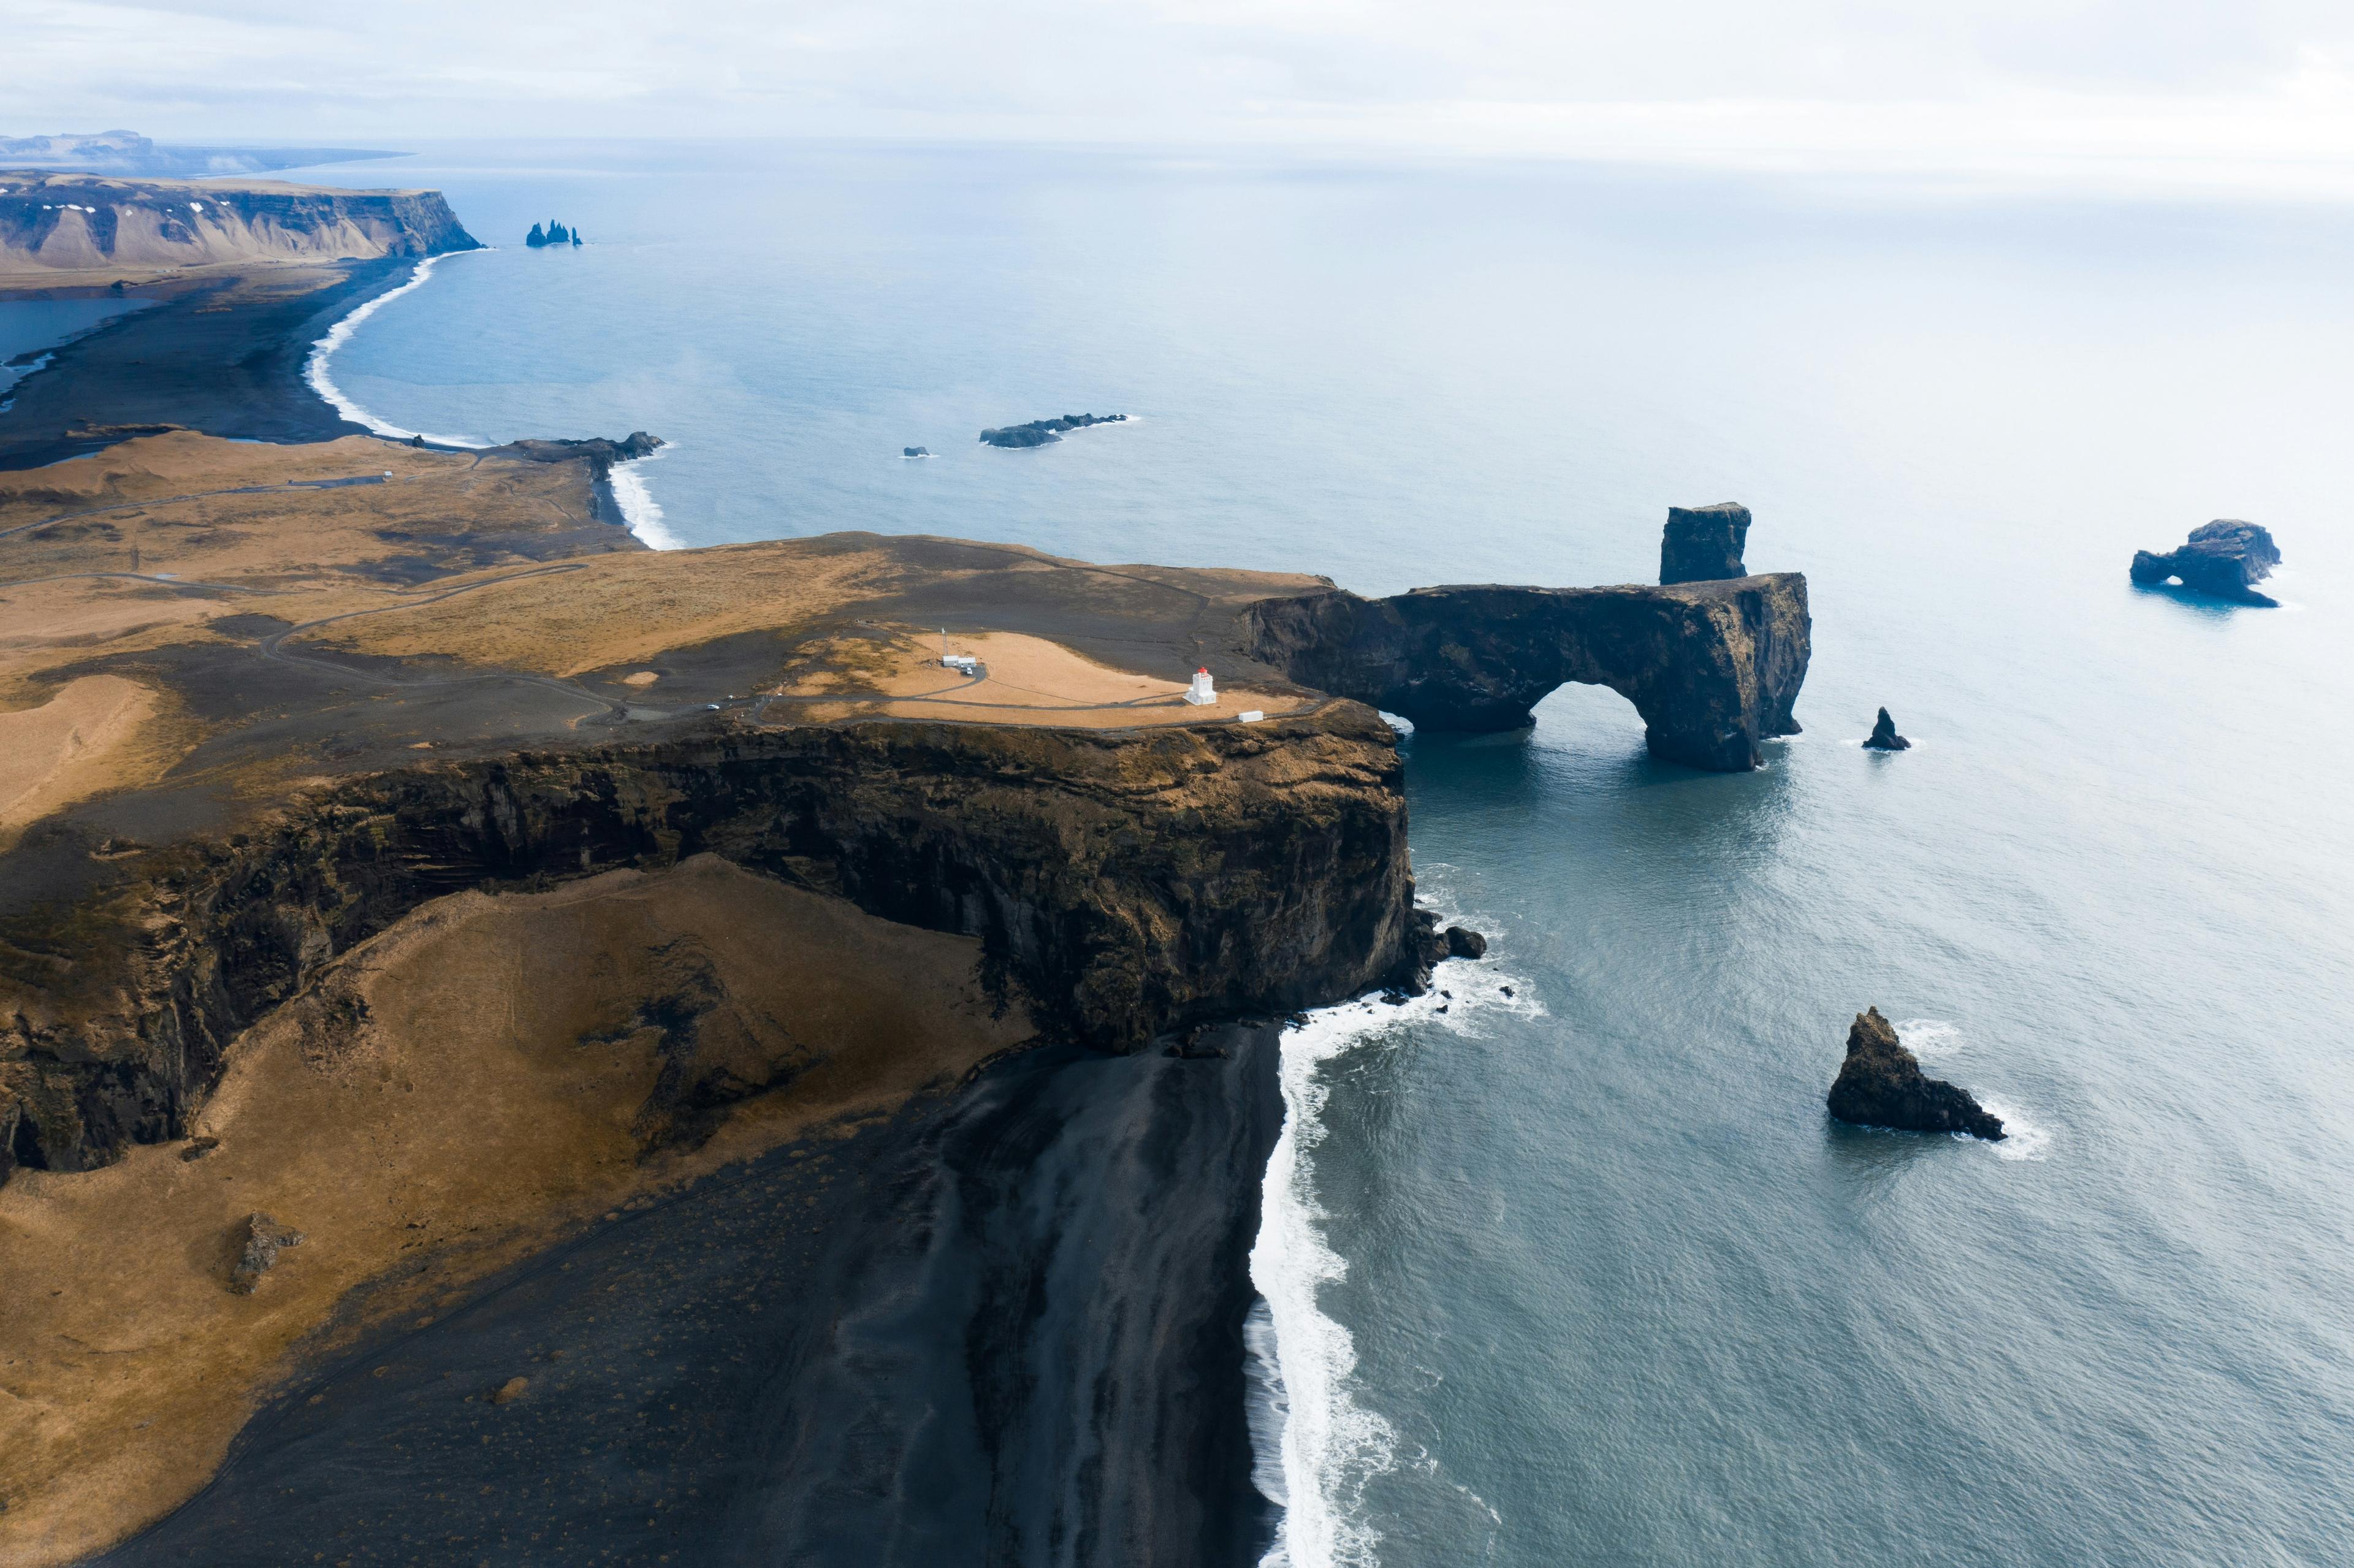 Aerial view of a rugged coastline with a distinctive arch rock formation in the sea, black sand beach, and a small lighthouse on the cliff.